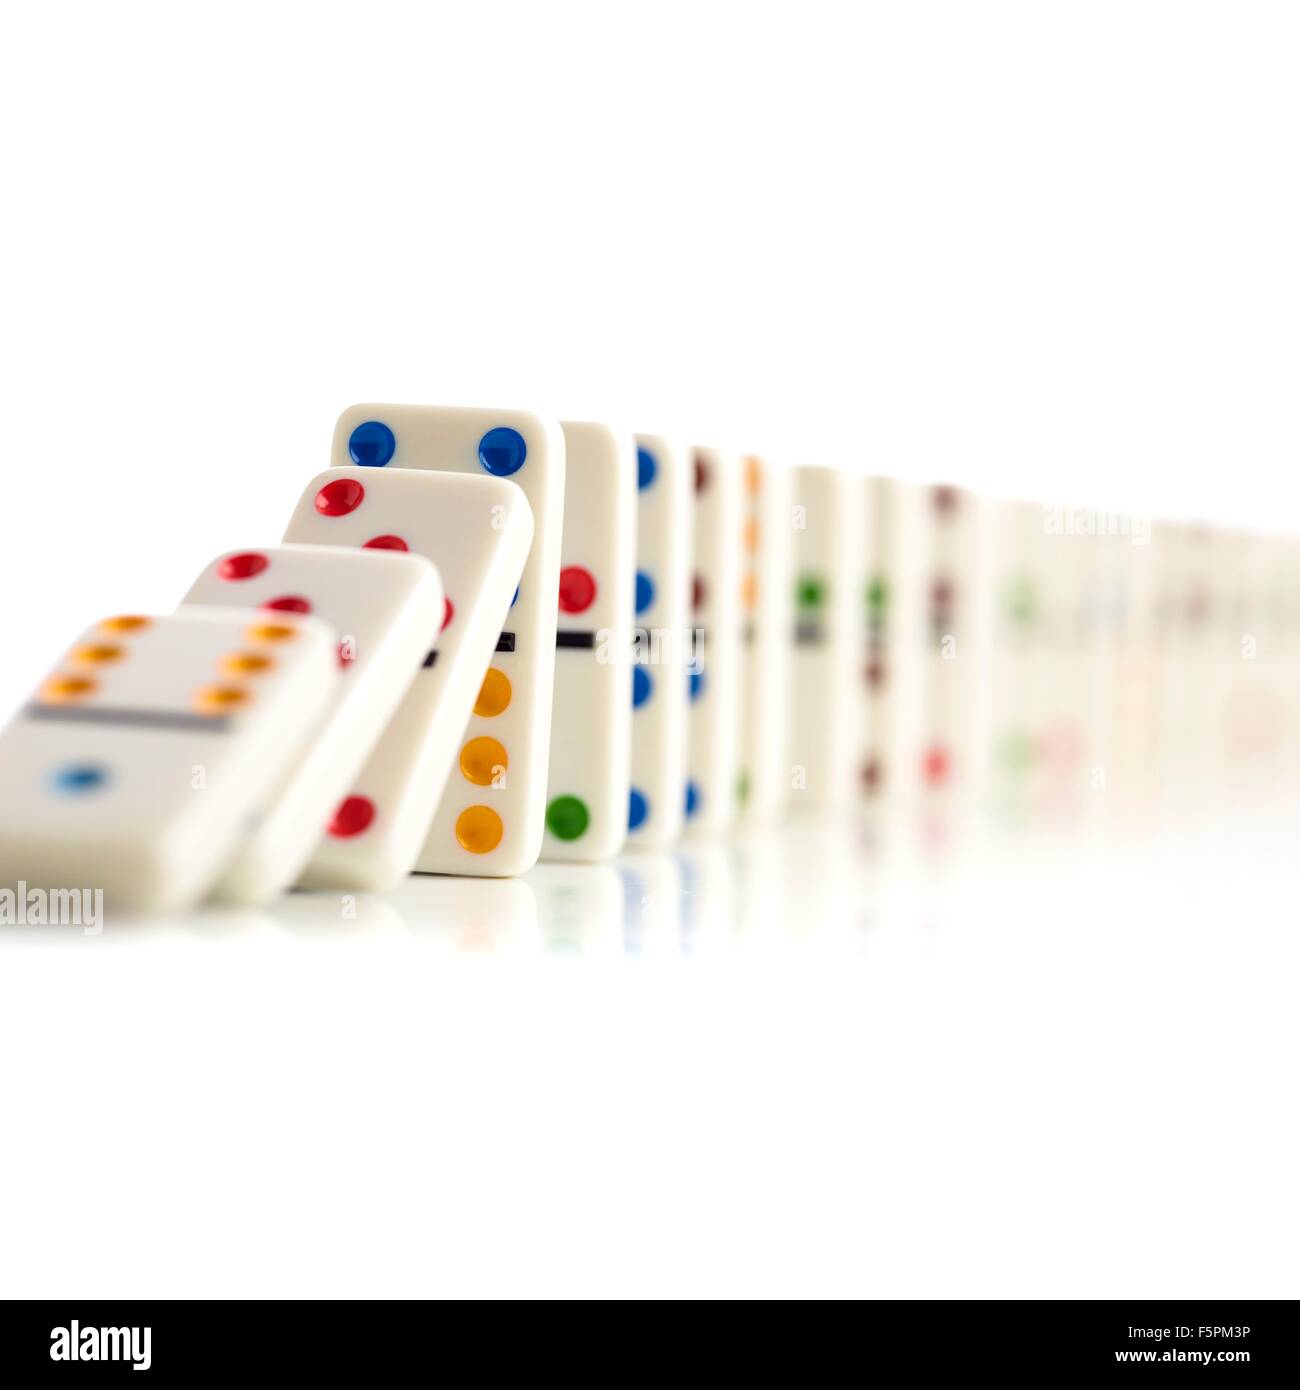 Colourful dominoes falling down against a white background. Stock Photo